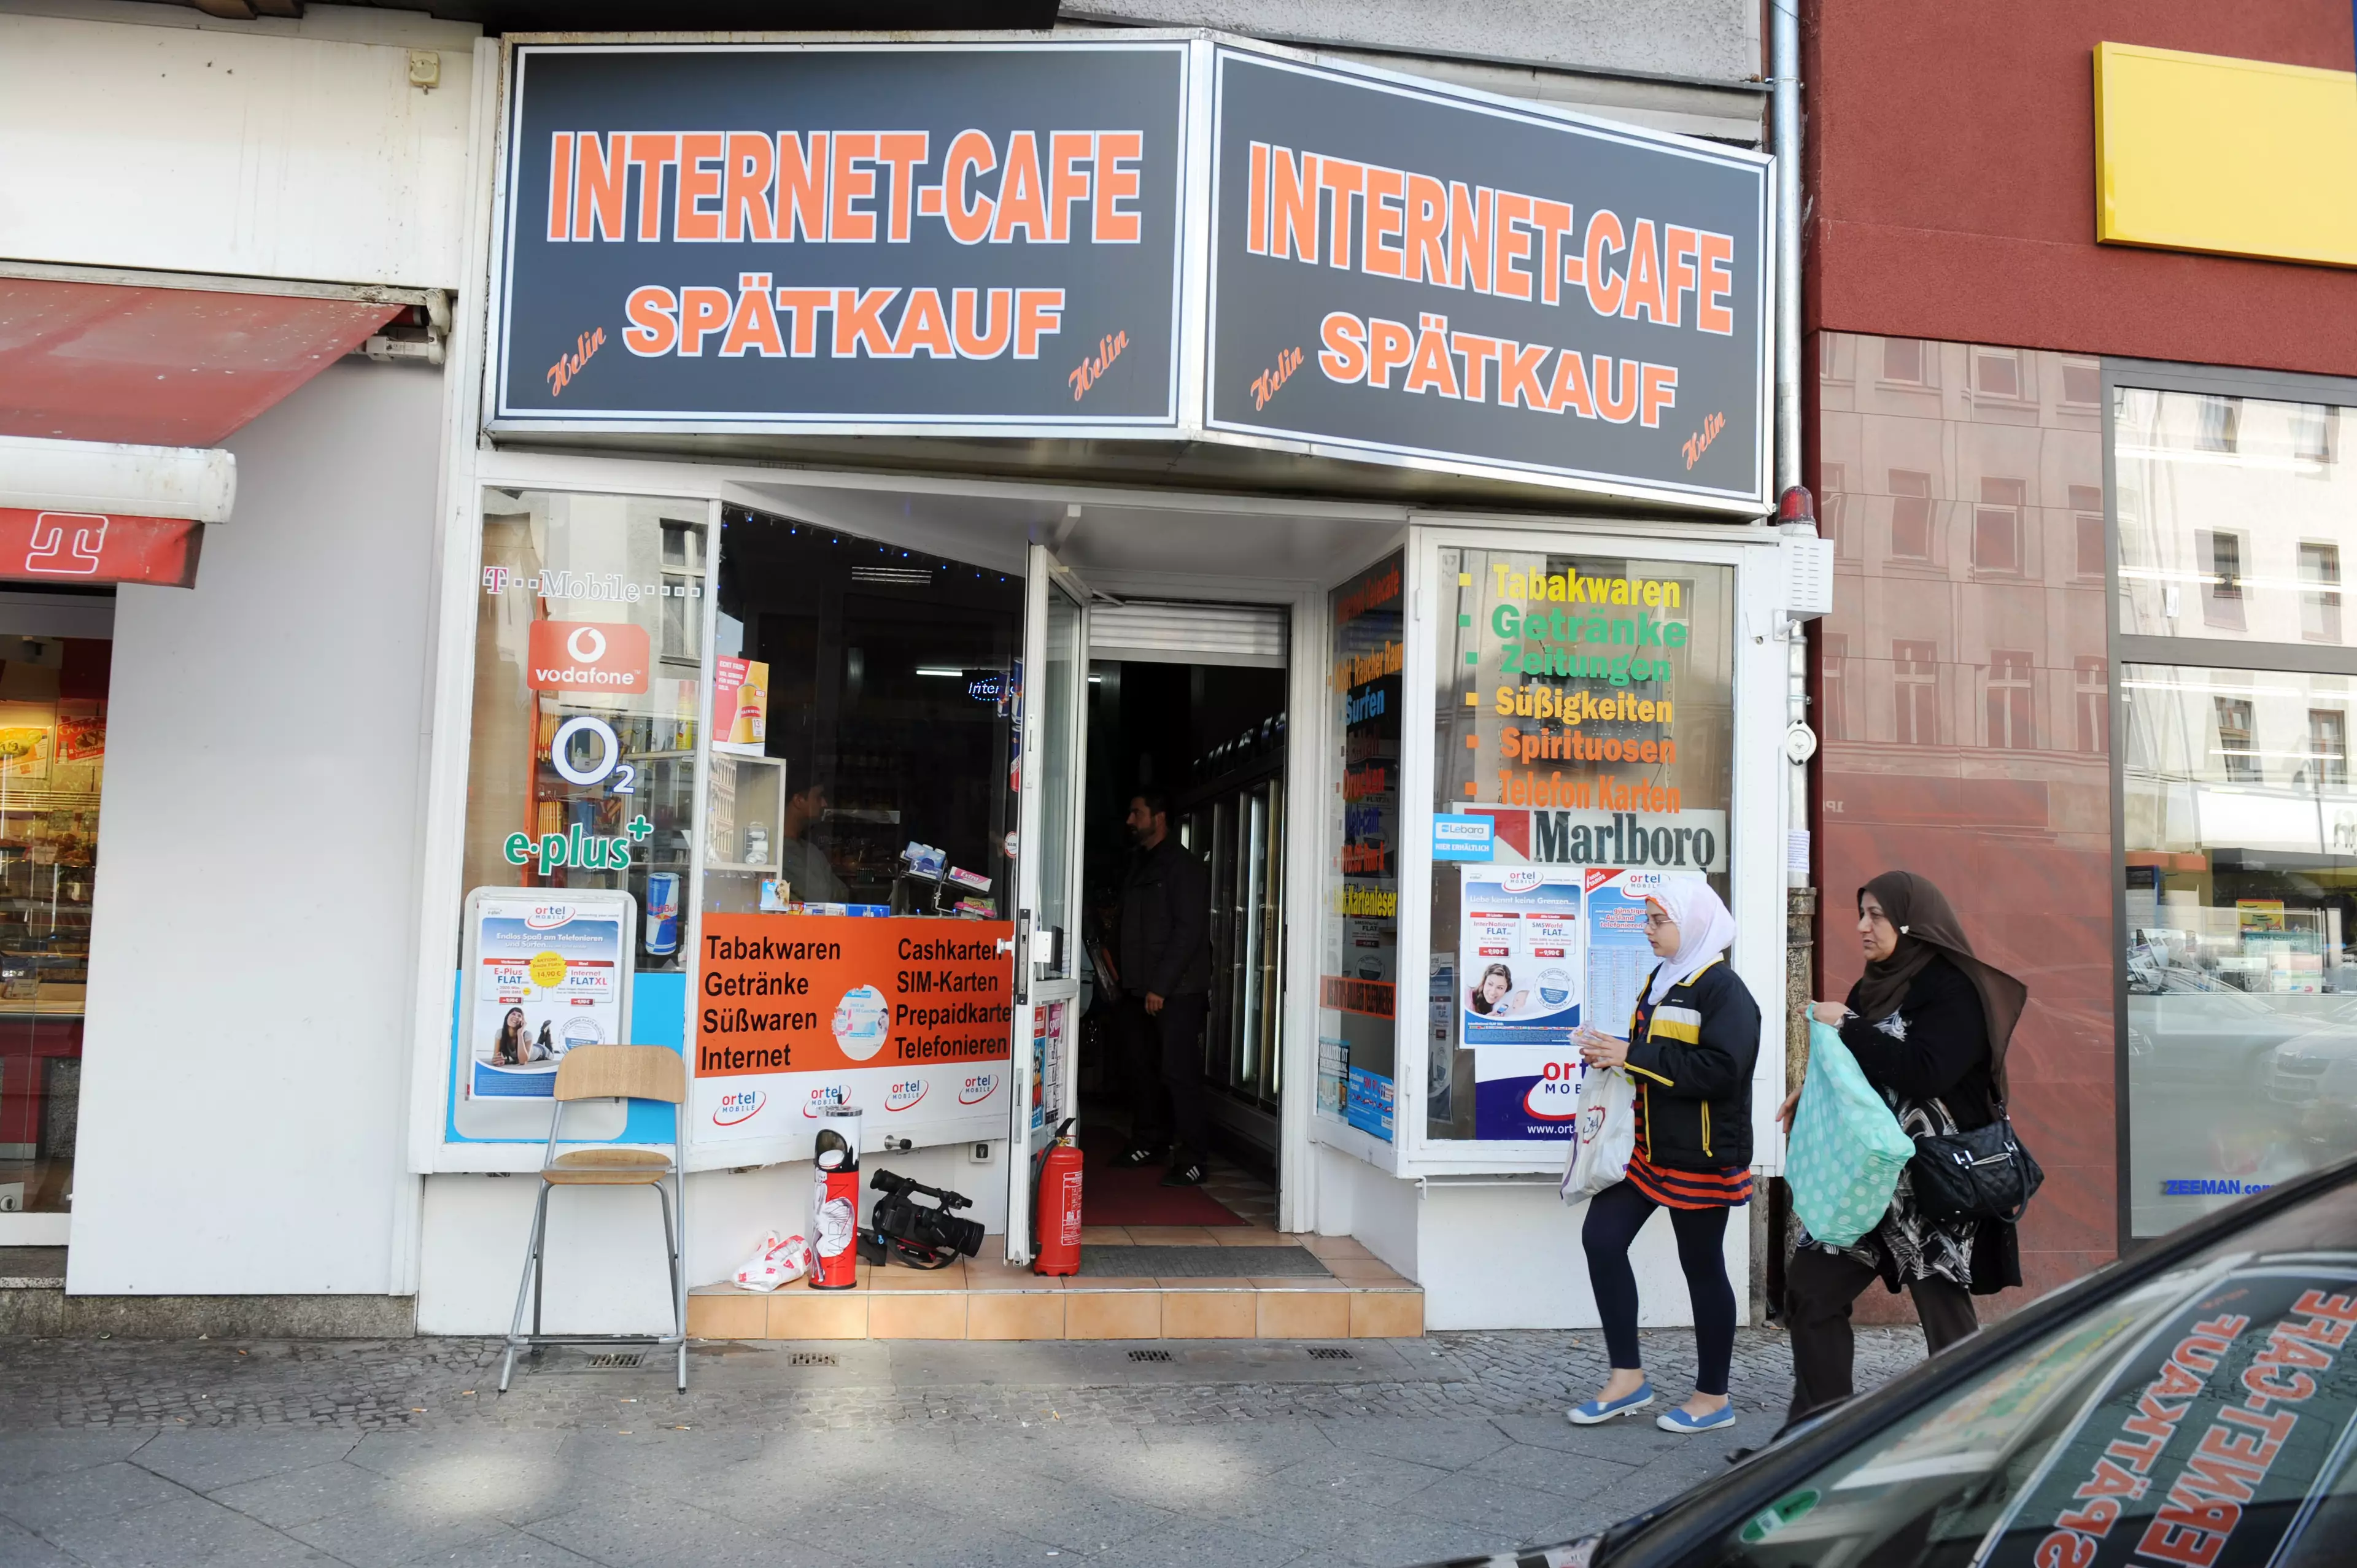 Magnetta was discovered in this Internet cafe in Berlin. (